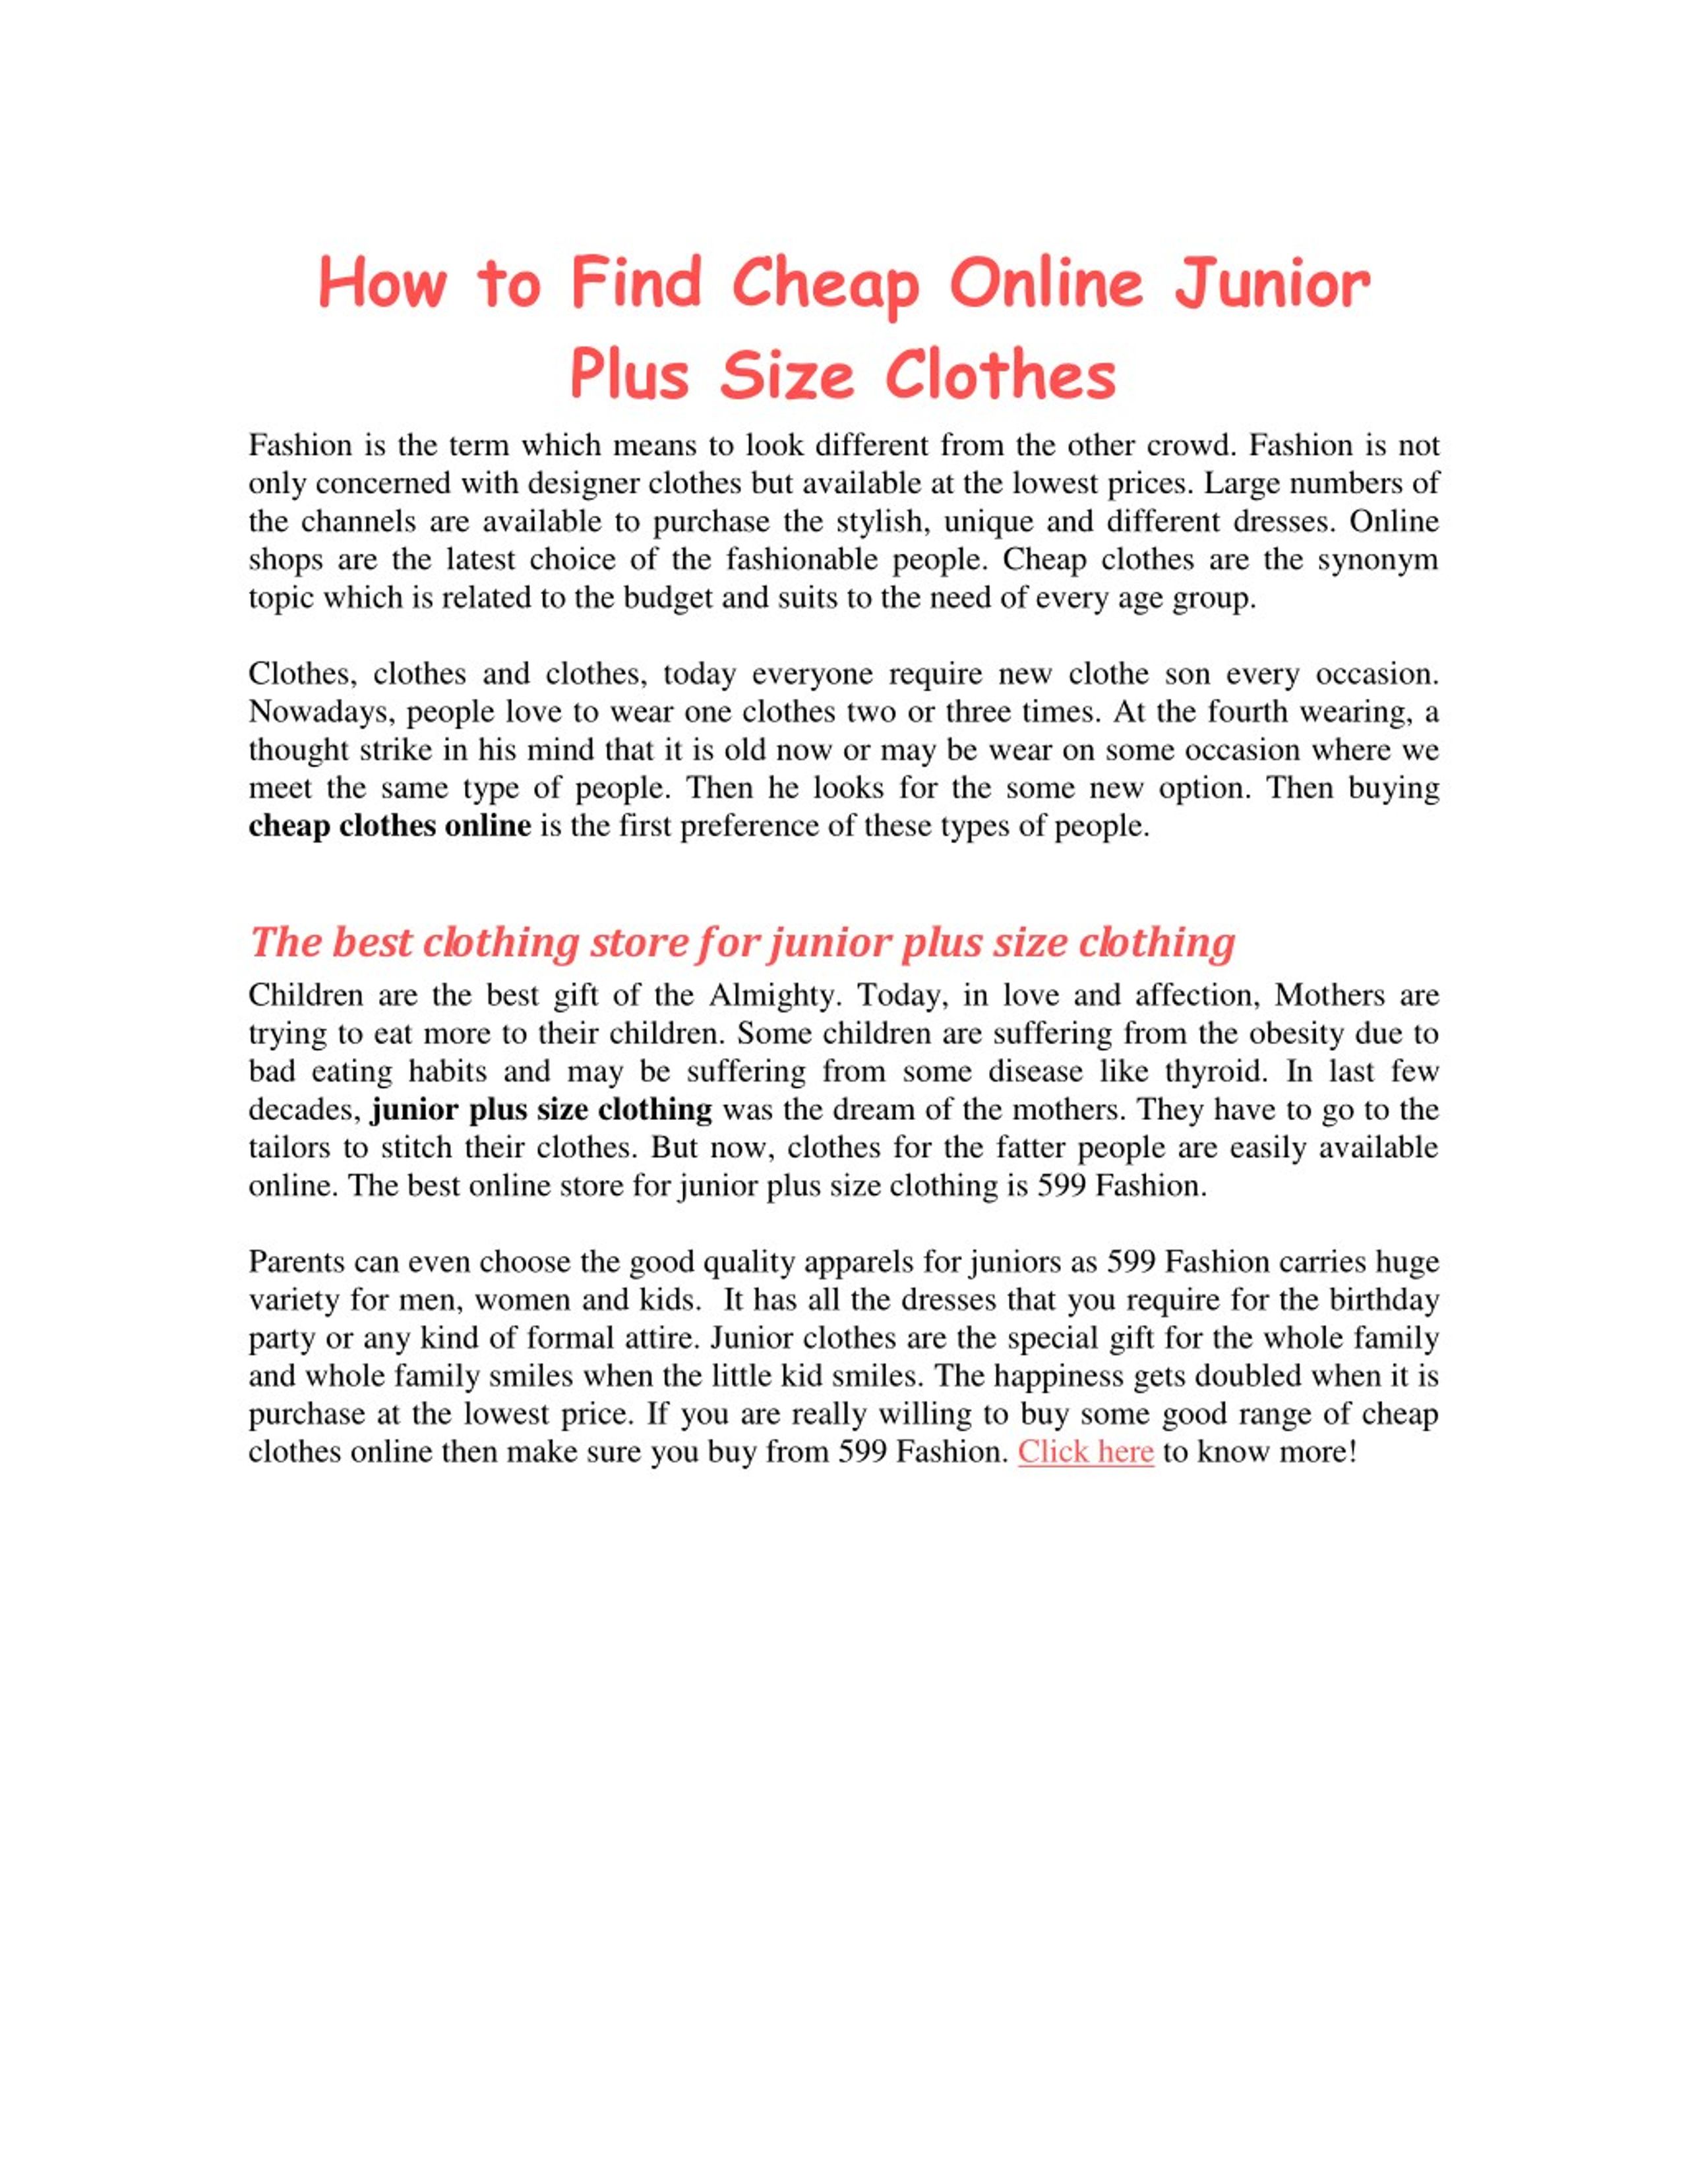 PPT - How to Find Cheap Online Junior Plus Size Clothes PowerPoint  Presentation - ID:7874660